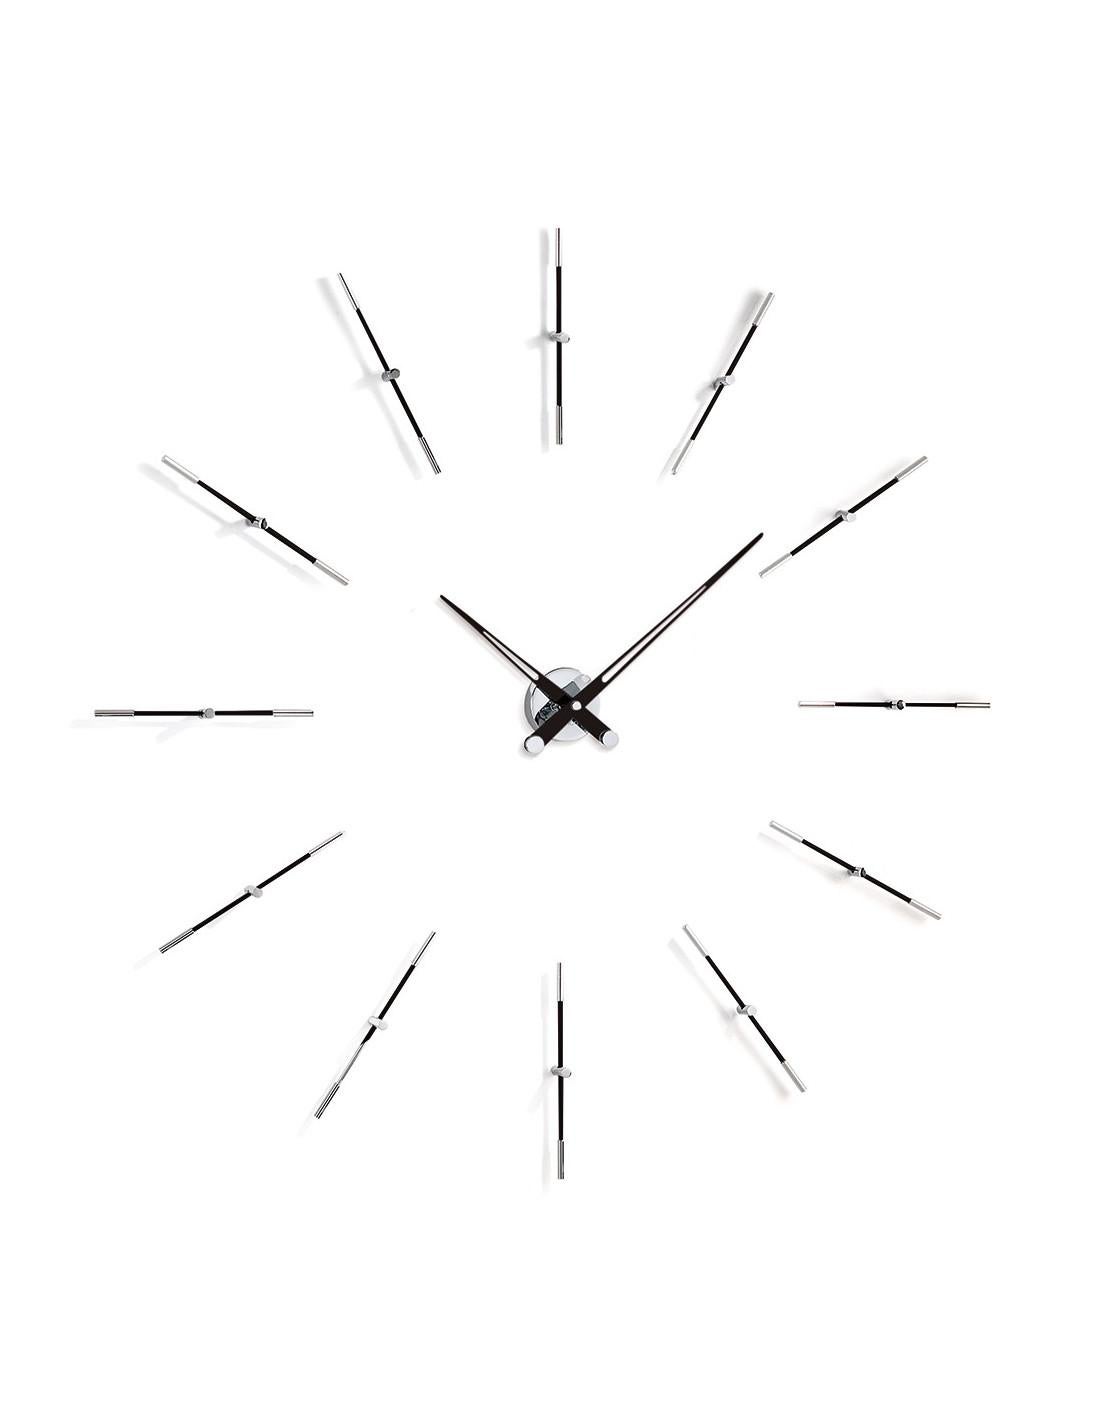 Merlín 12 i wall clock is ideal for decorating modern spaces of both a house and an office .
 Merlín 12 i wall clock : Case made of chromed steel , Clock hand made of Polished Steel or painted in black, White and red.
Each clock is a unique